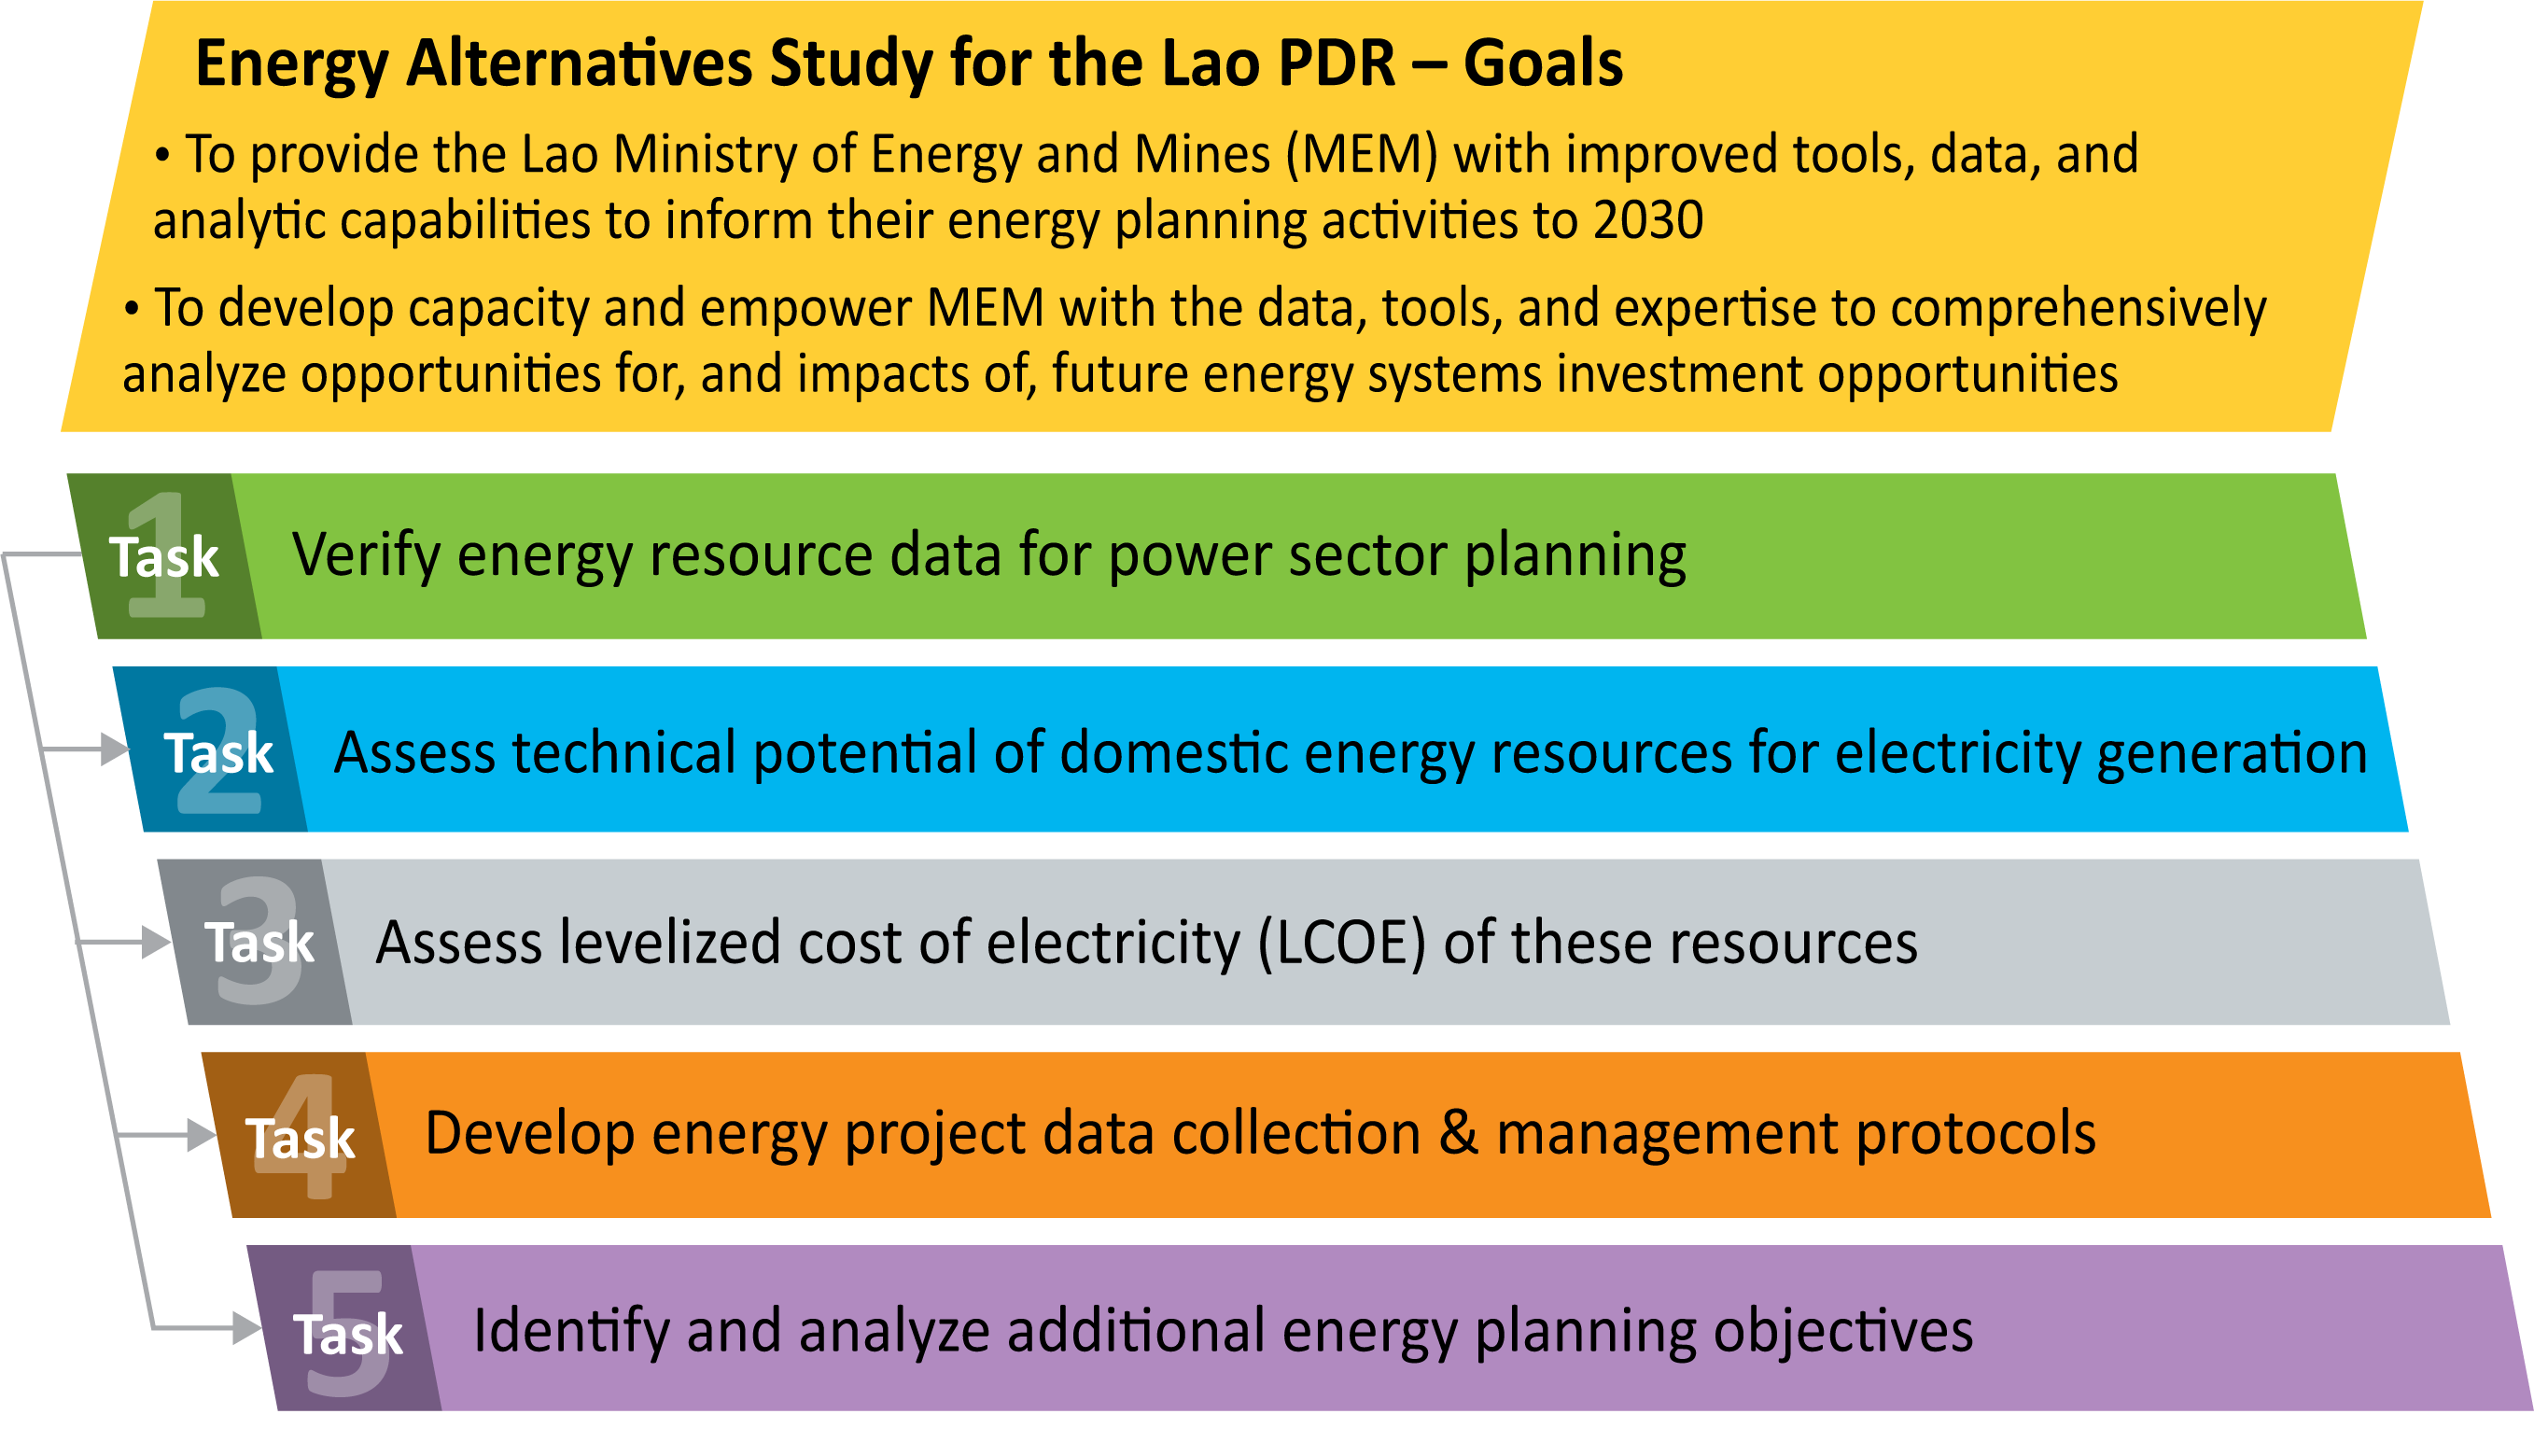 A roadmap of the goals and tasks of the Energy Alternatives Study for Lao PDR